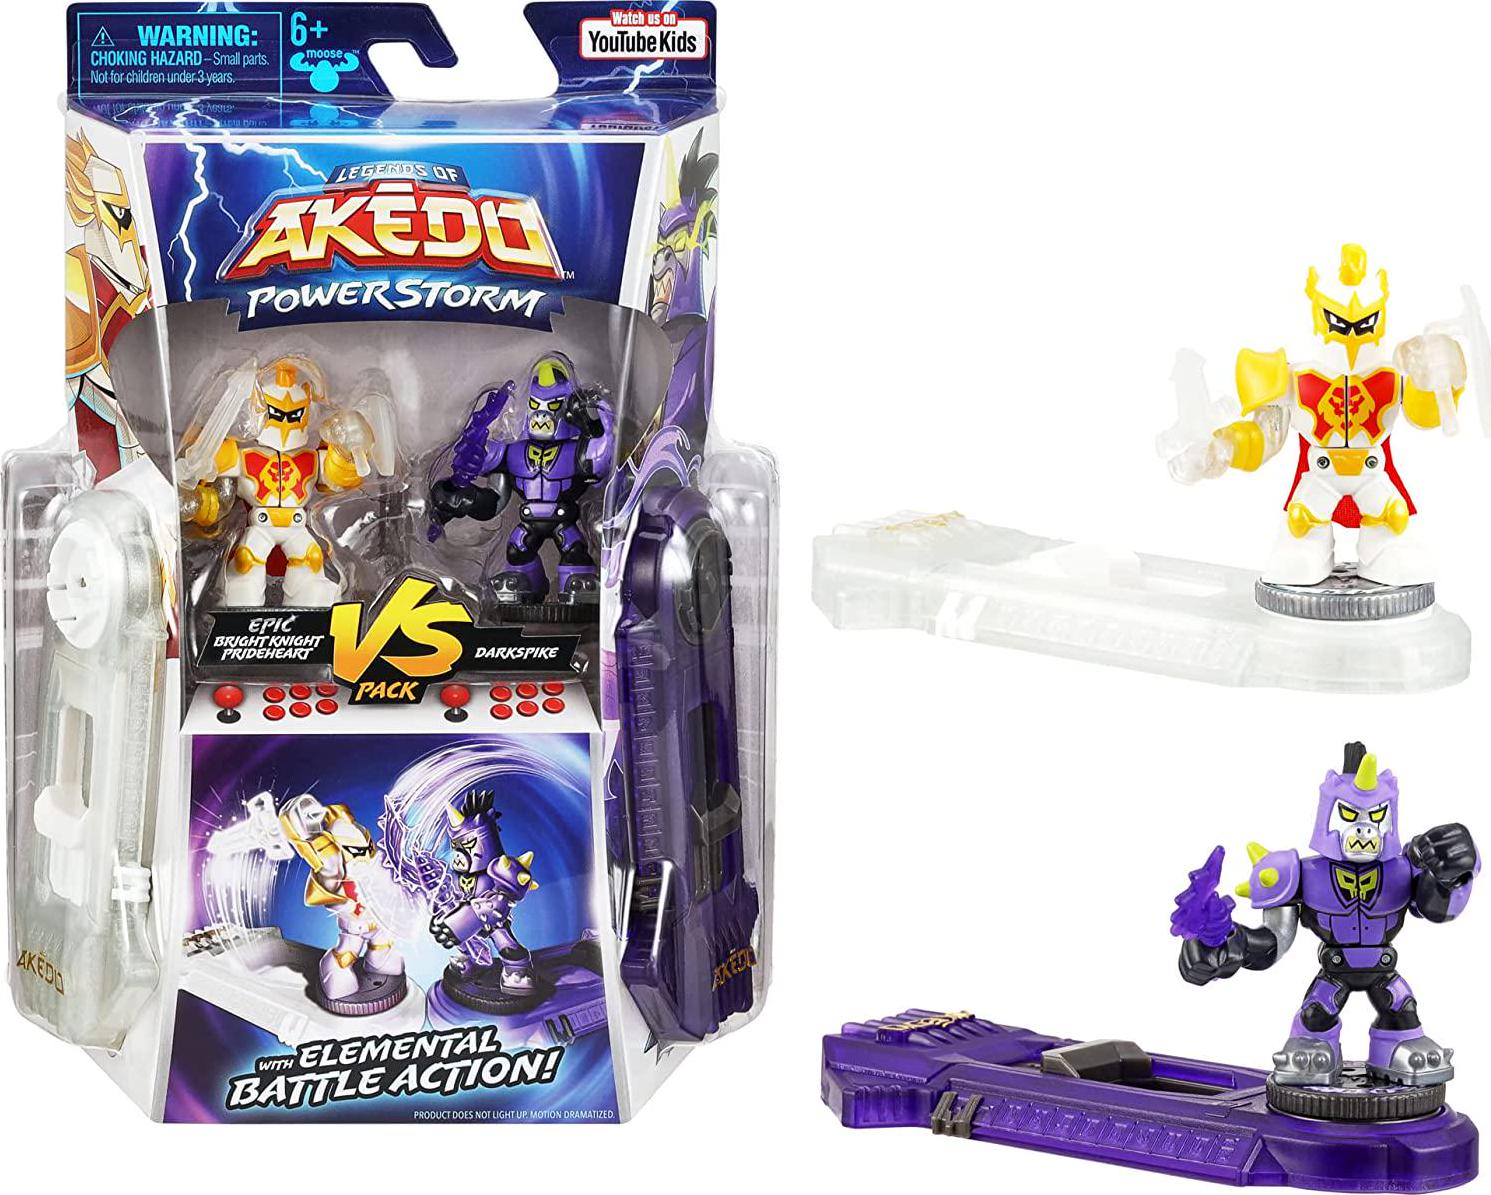 Akedo, Legends of Akedo Powerstorm Versus Pack 2 Mini Battling Action Figures and 2 Battle Controllers Epic Bright Knight Prideheart Versus Darkspike, Multicolor (15174)